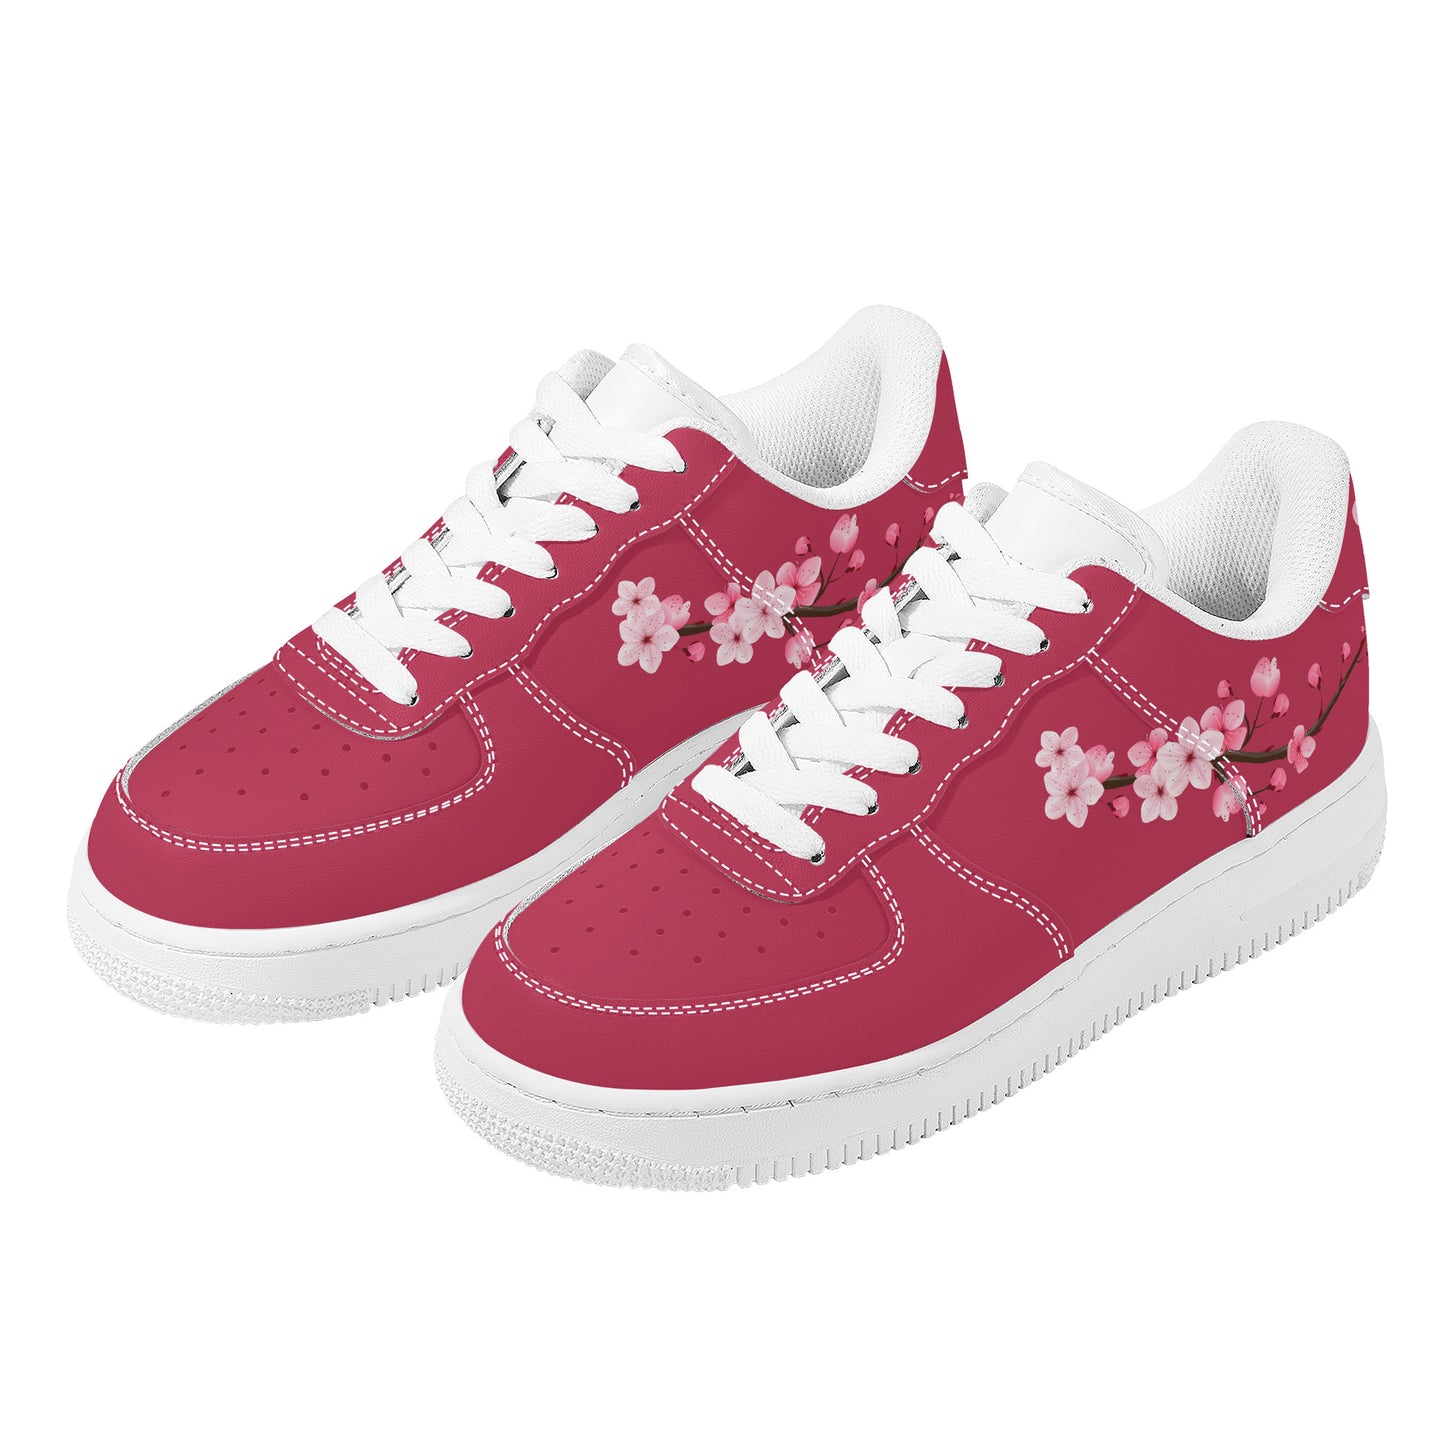 Cherry Blossom Sneakers